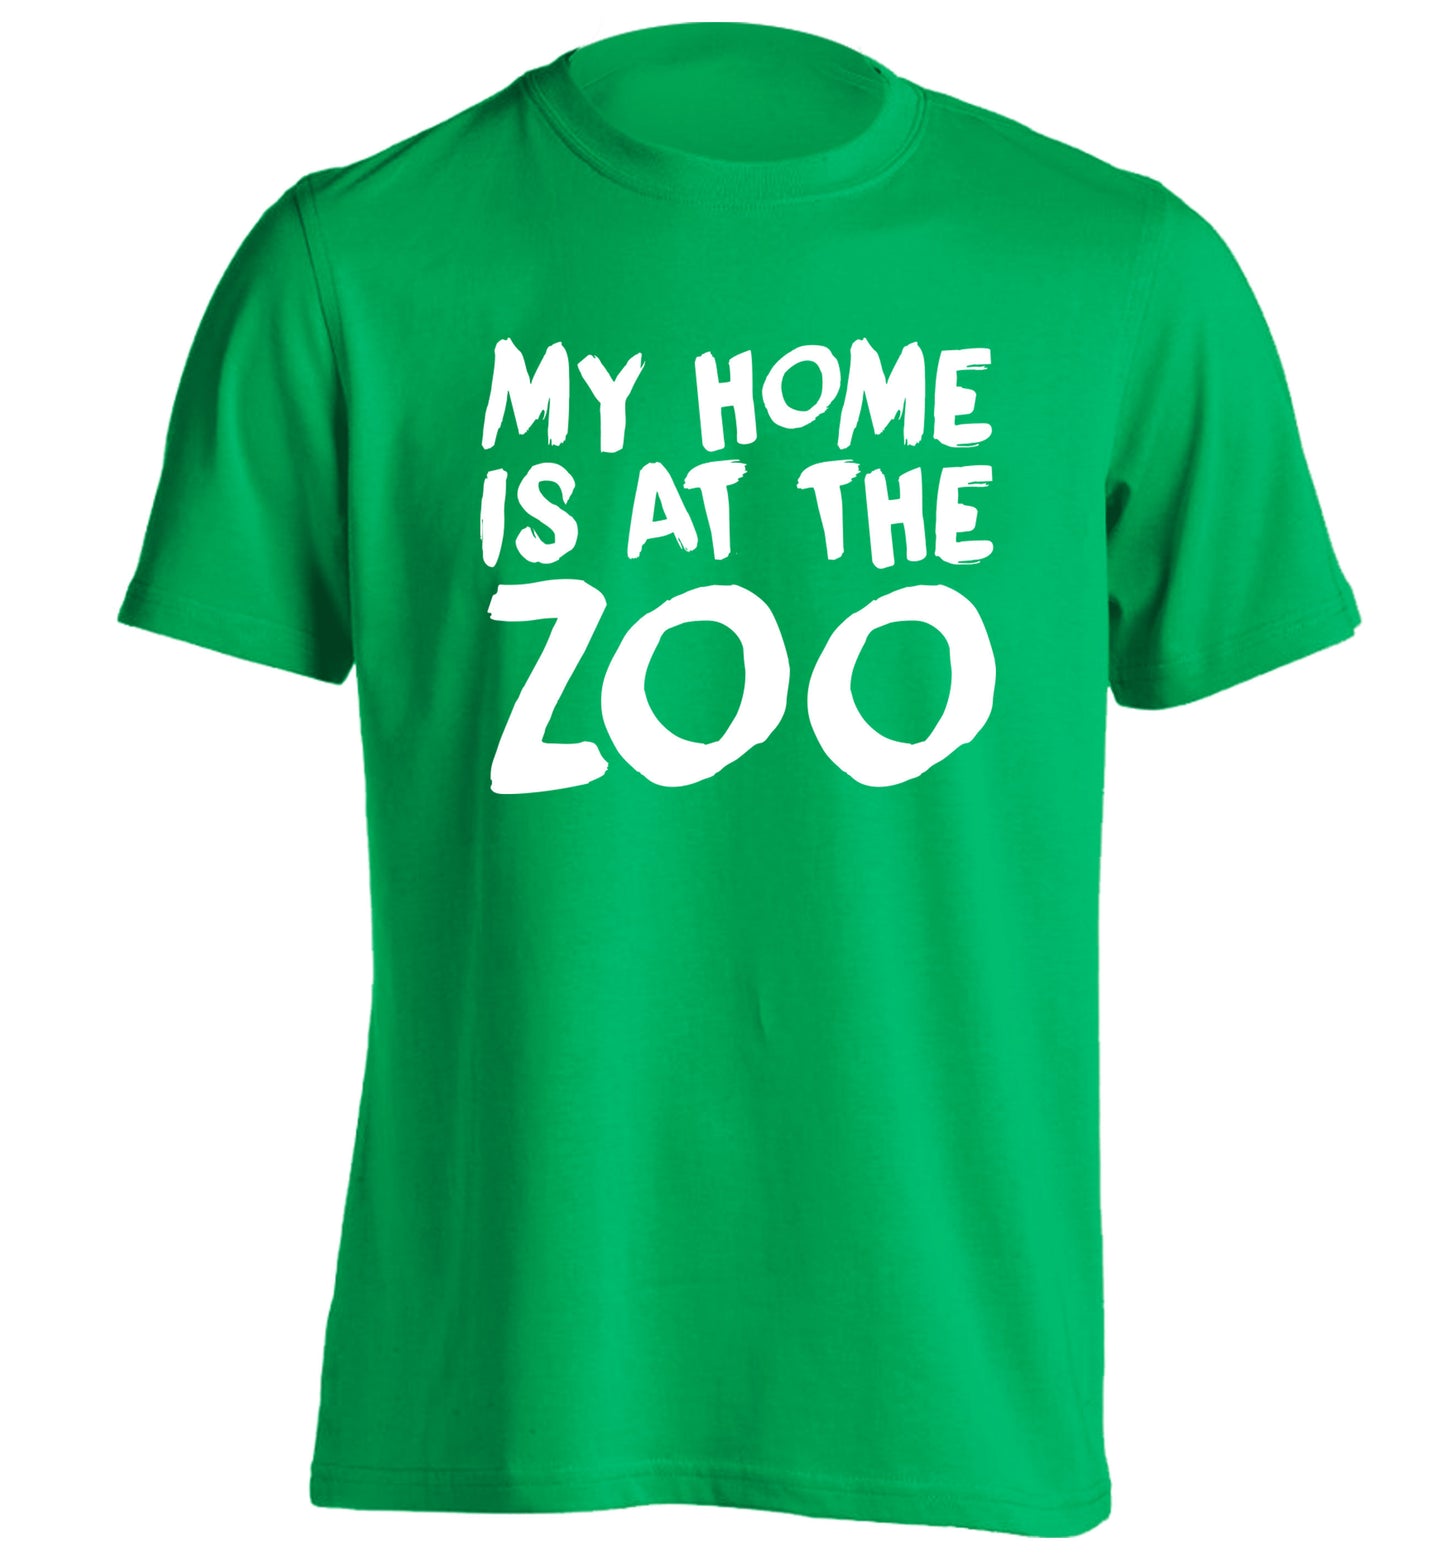 My home is at the zoo adults unisex green Tshirt 2XL